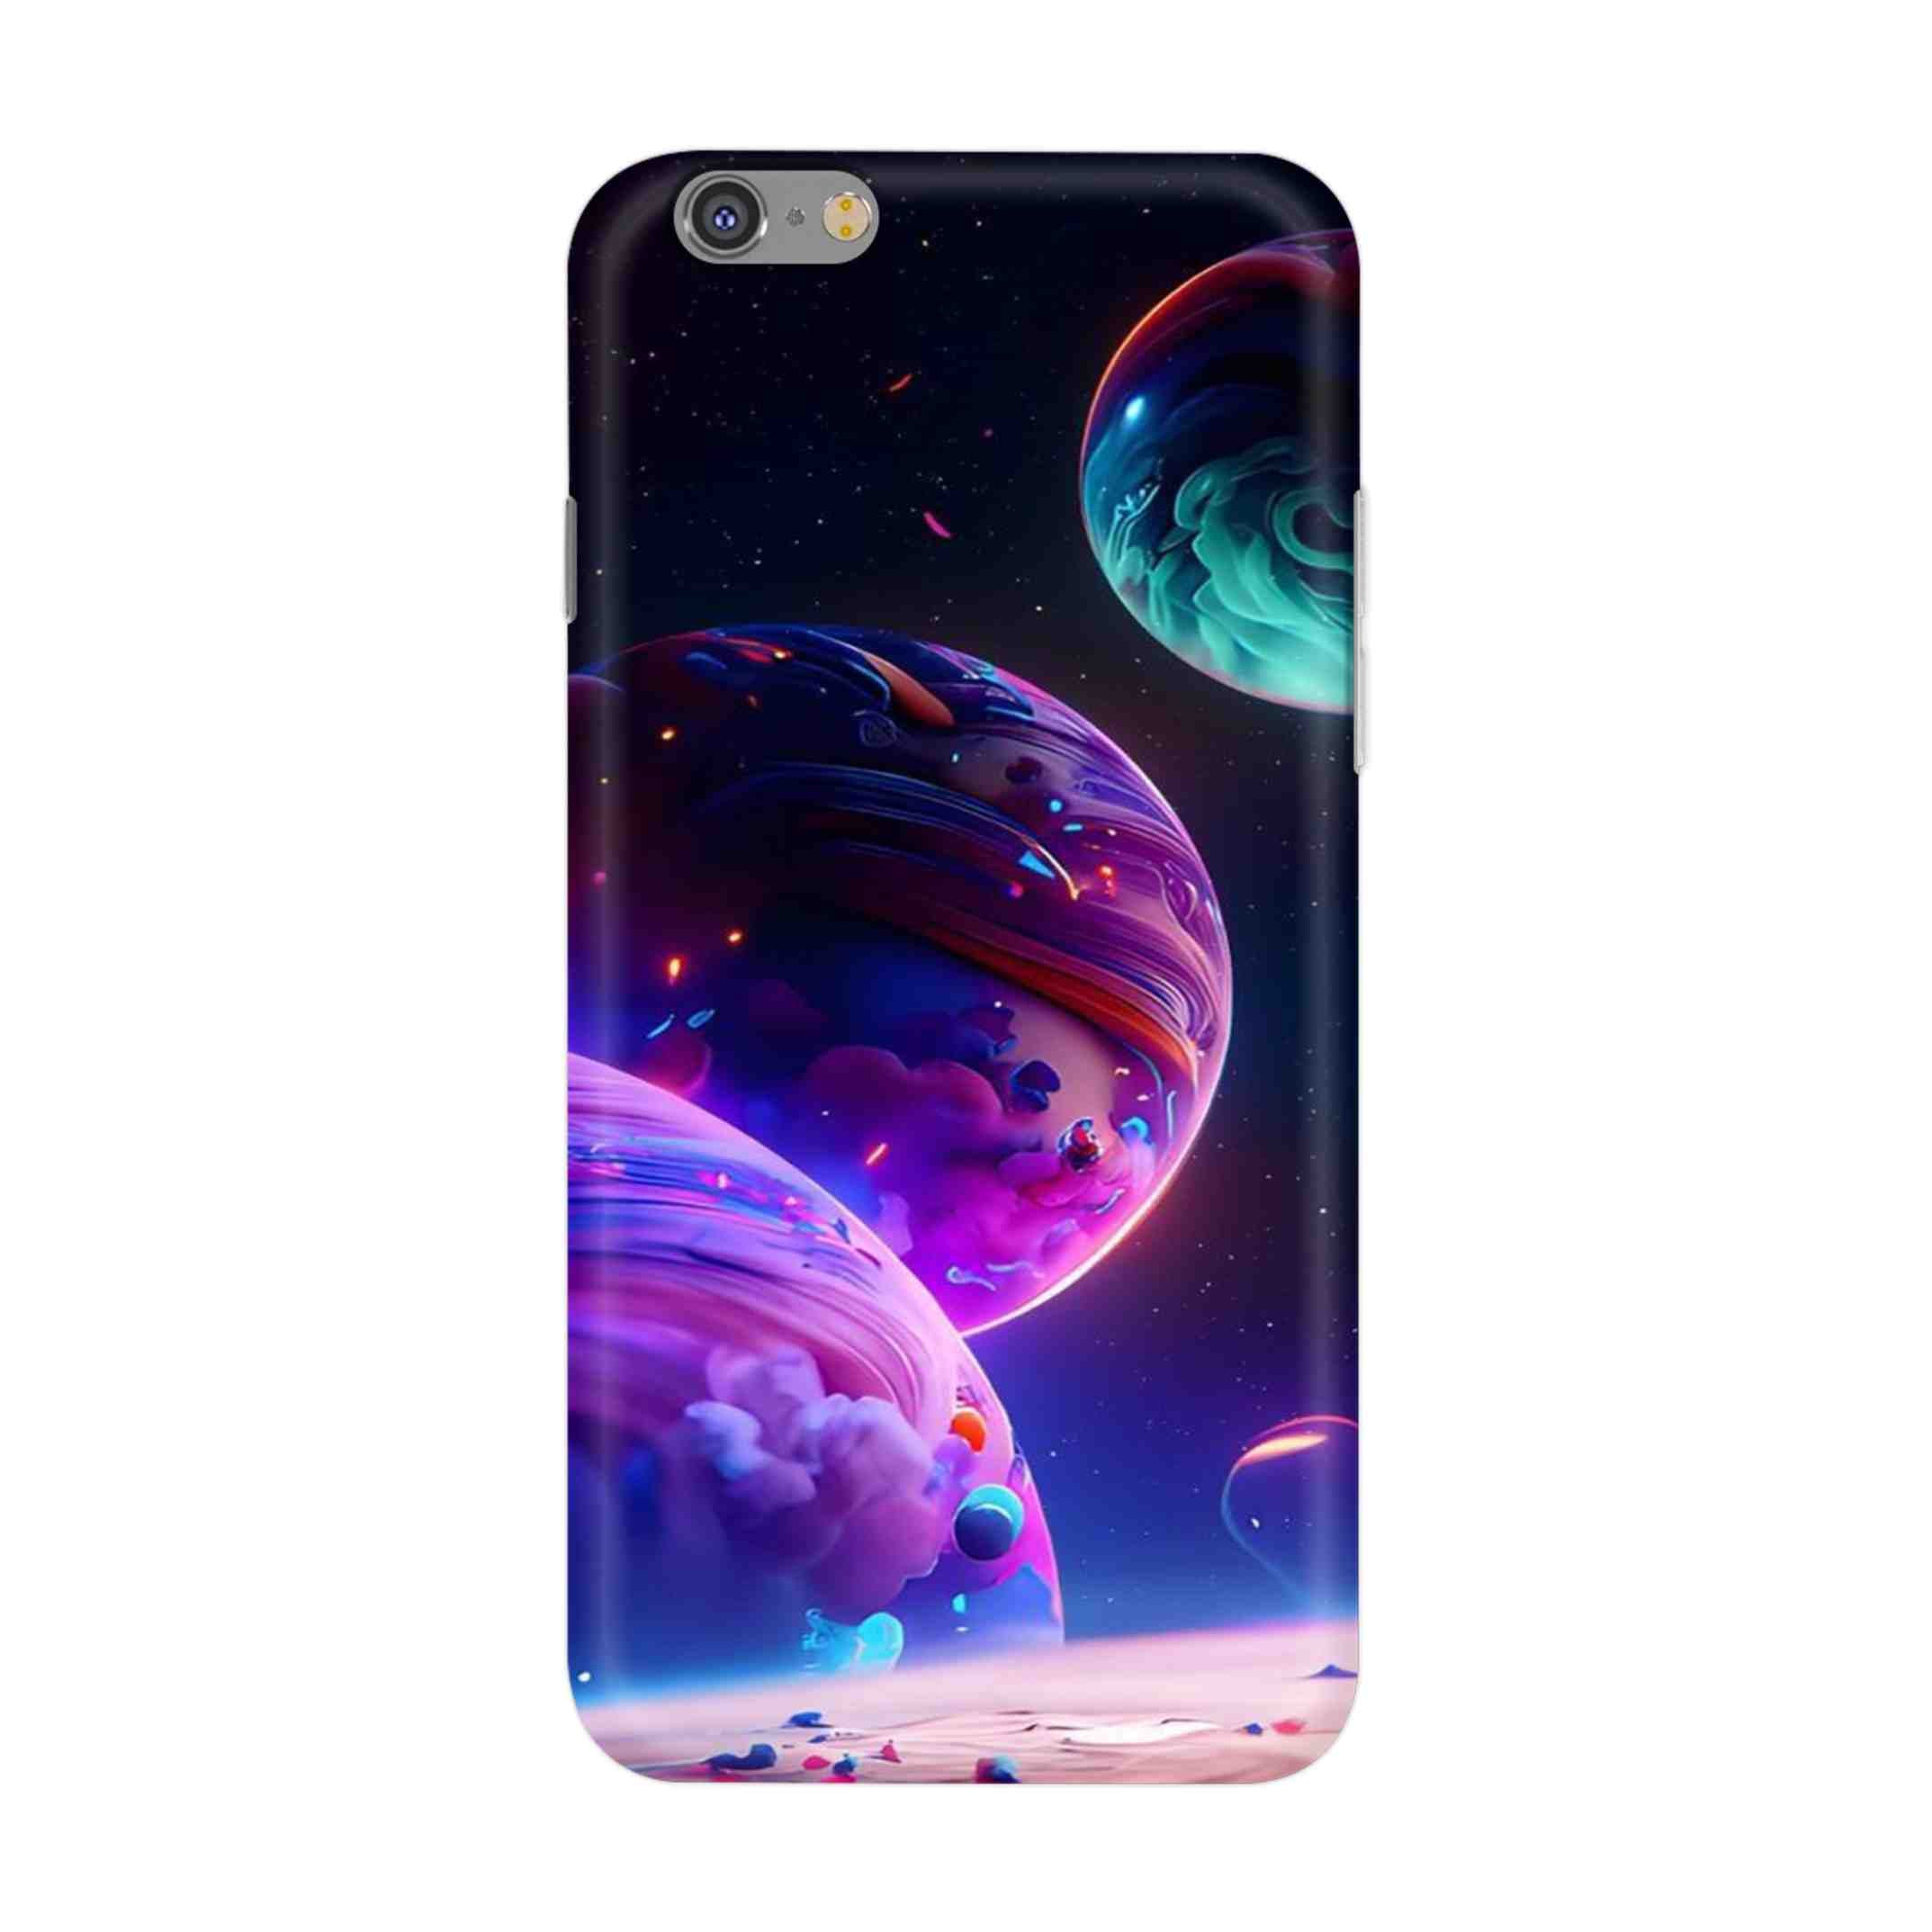 Buy 3 Earth Hard Back Mobile Phone Case/Cover For iPhone 6 / 6s Online